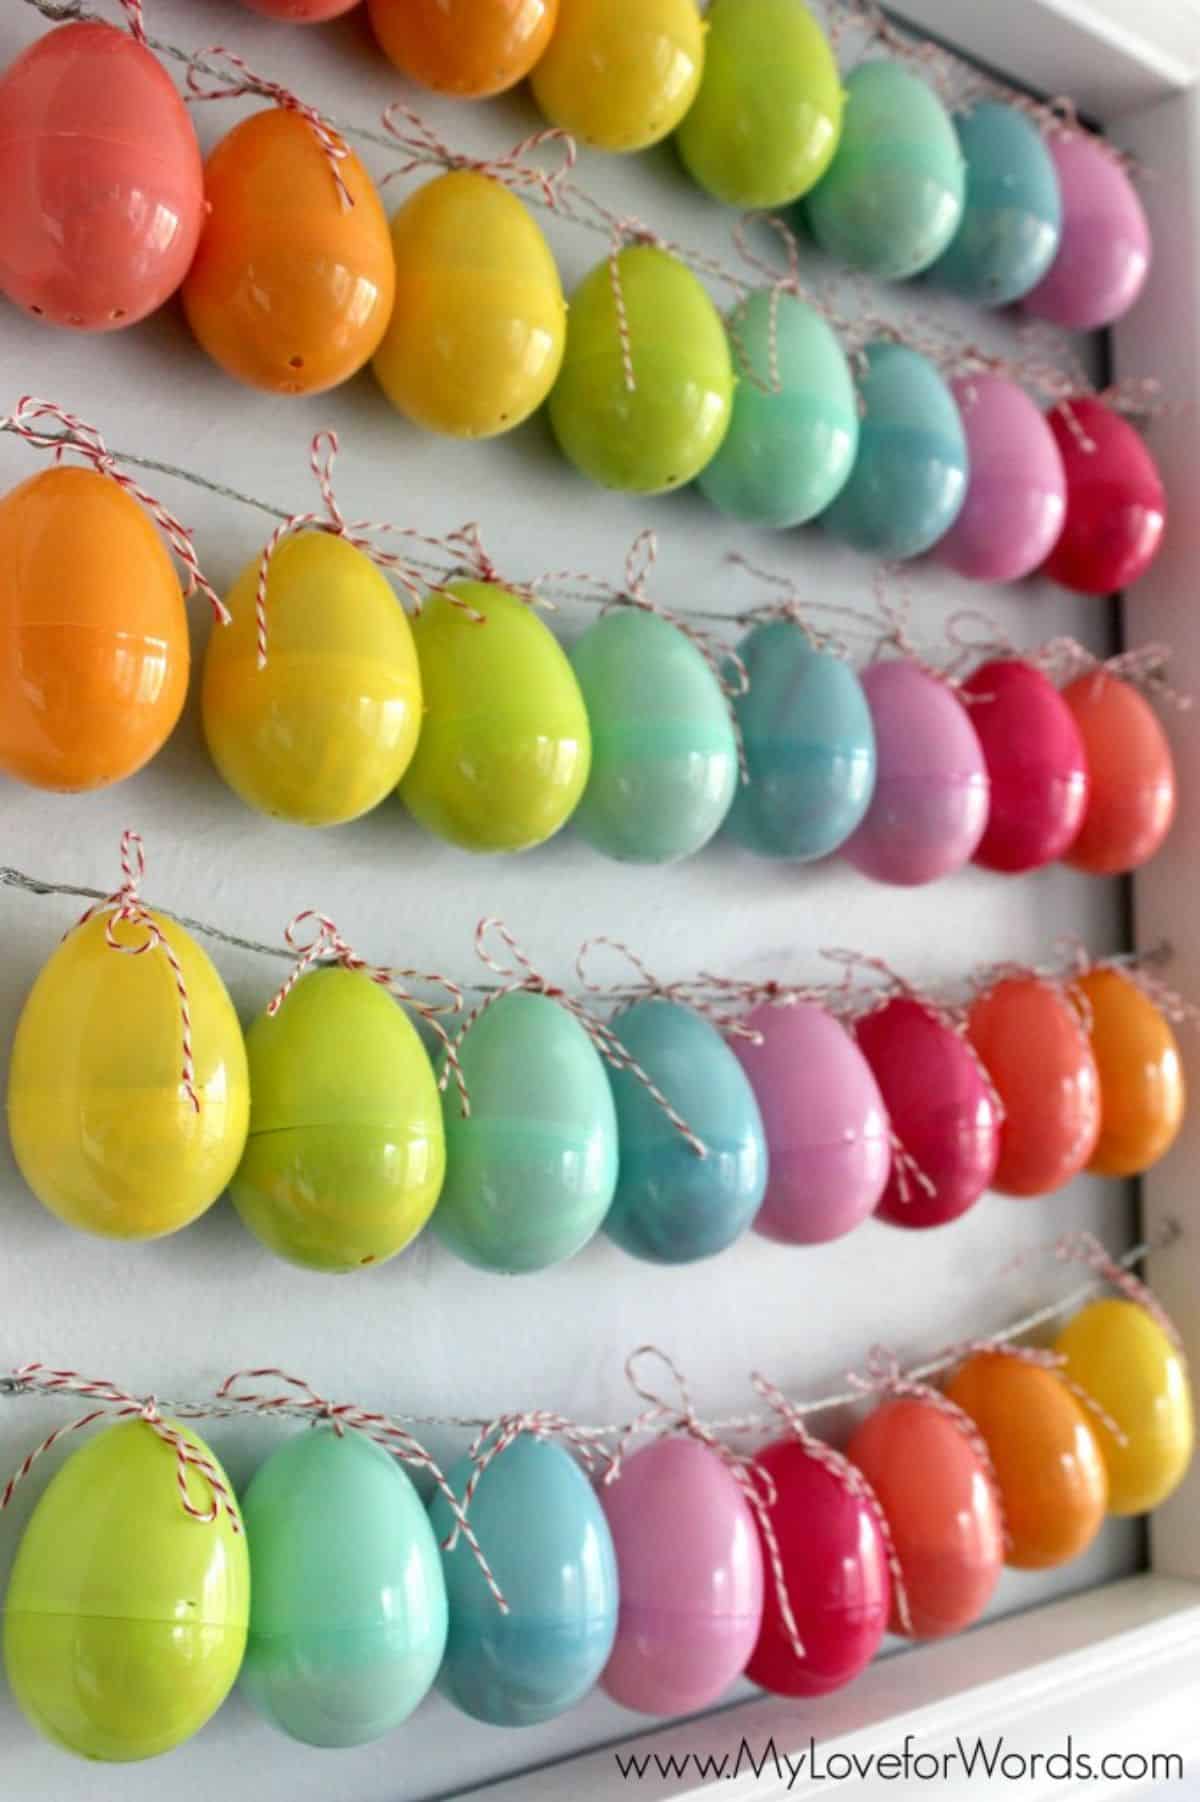 Diy easter eggs with gits inside.